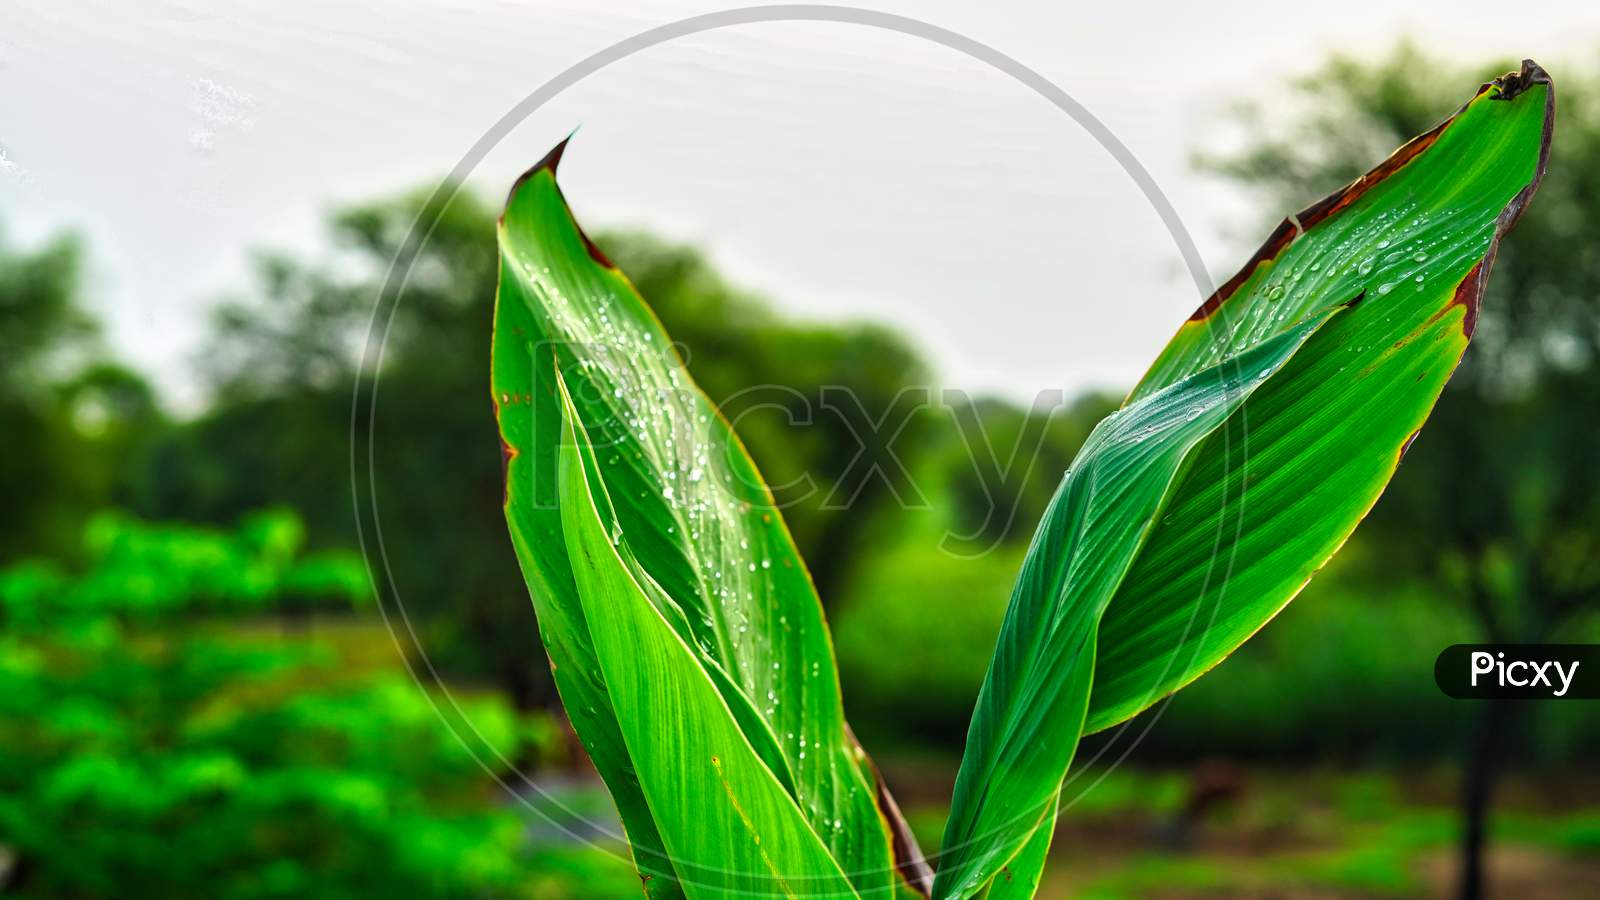 Canna Lily Leaves That Like Banana Leaf. Tropical Spring And Summer Leaves Background.